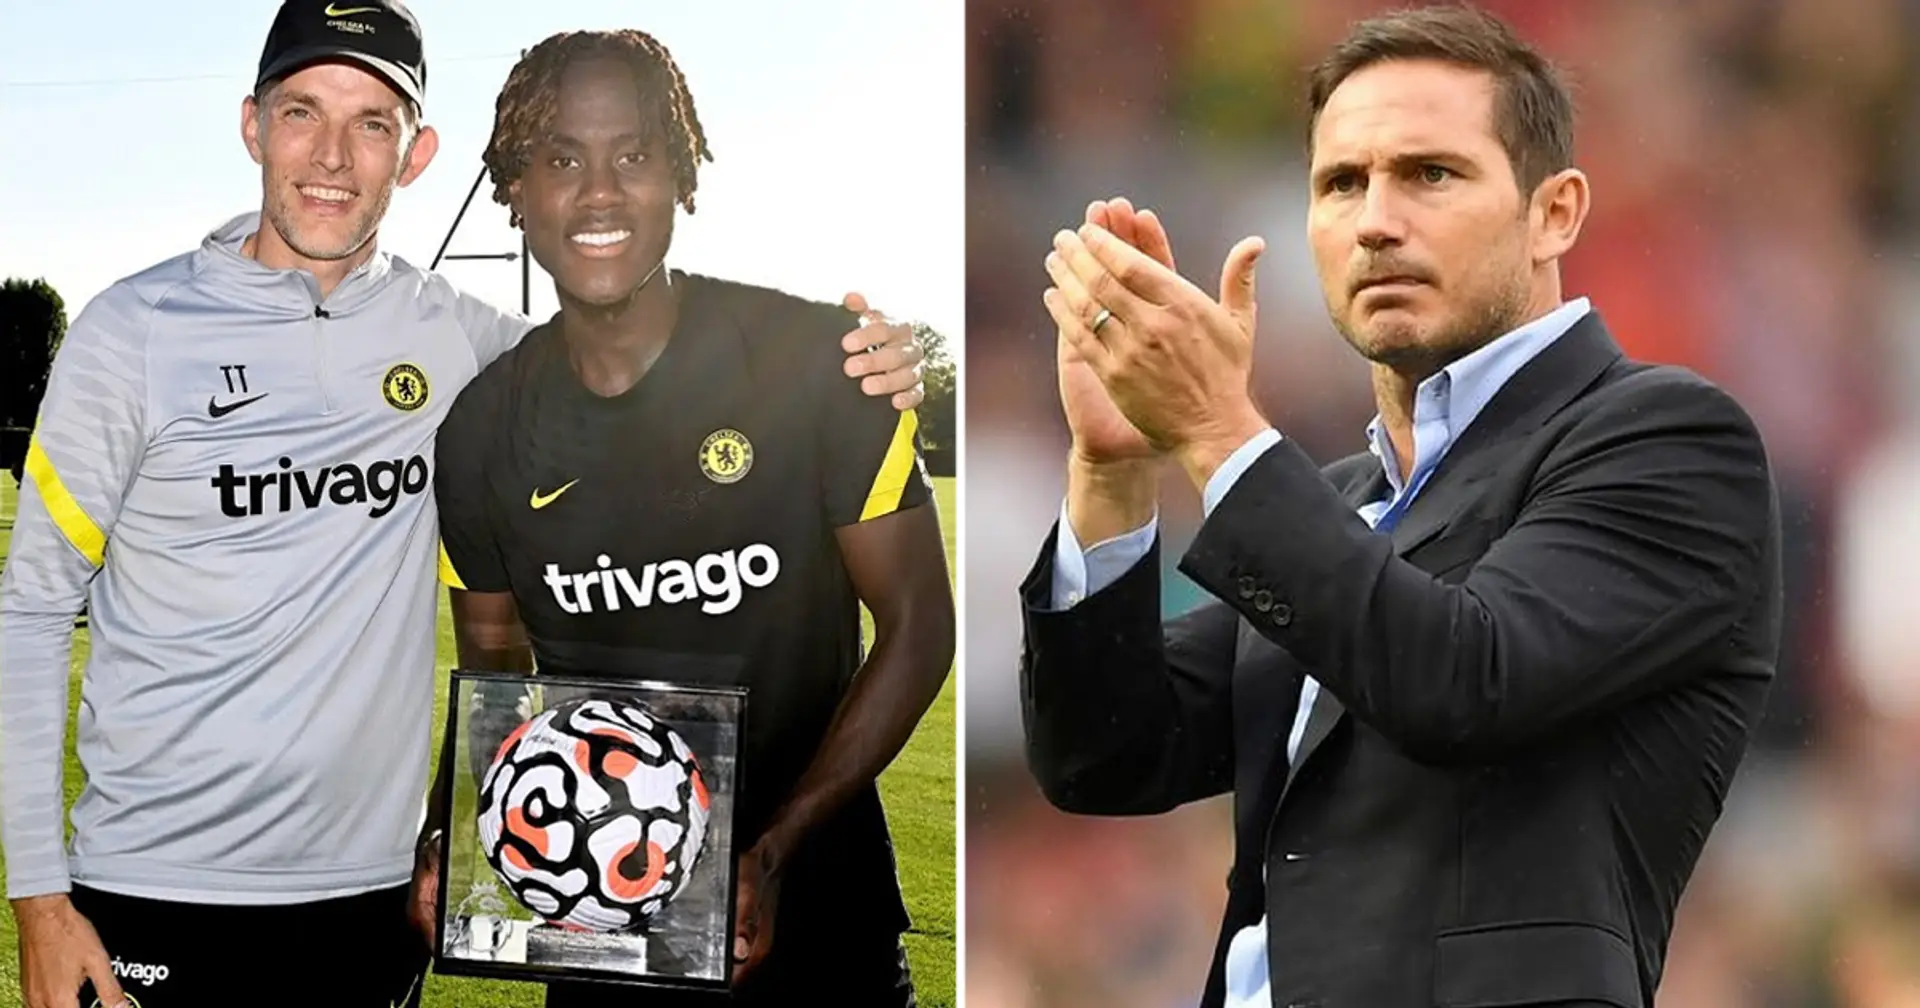 'The door Lampard opened stays open': fan lists 4 arguments to prove Chelsea's youth revolution remains alive